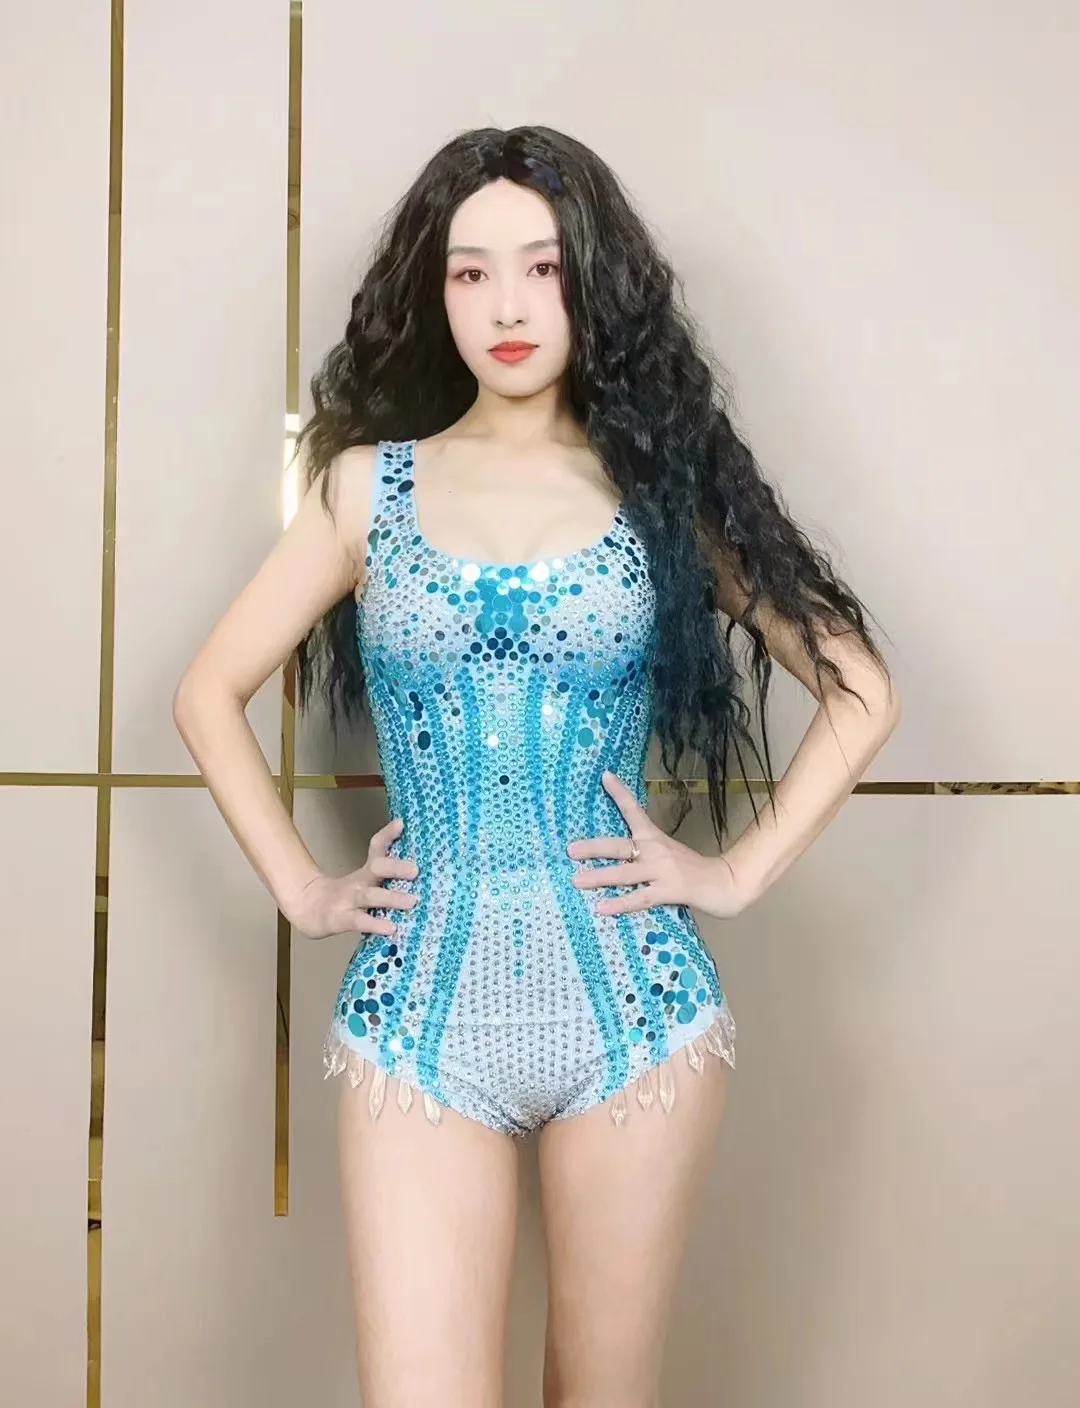 

Goddess Senior Luxury Women Sparkly Bodysuits Stage Wear Dance Costume DJ DS Night Club Performance Body Suits Drag Queen Outfit